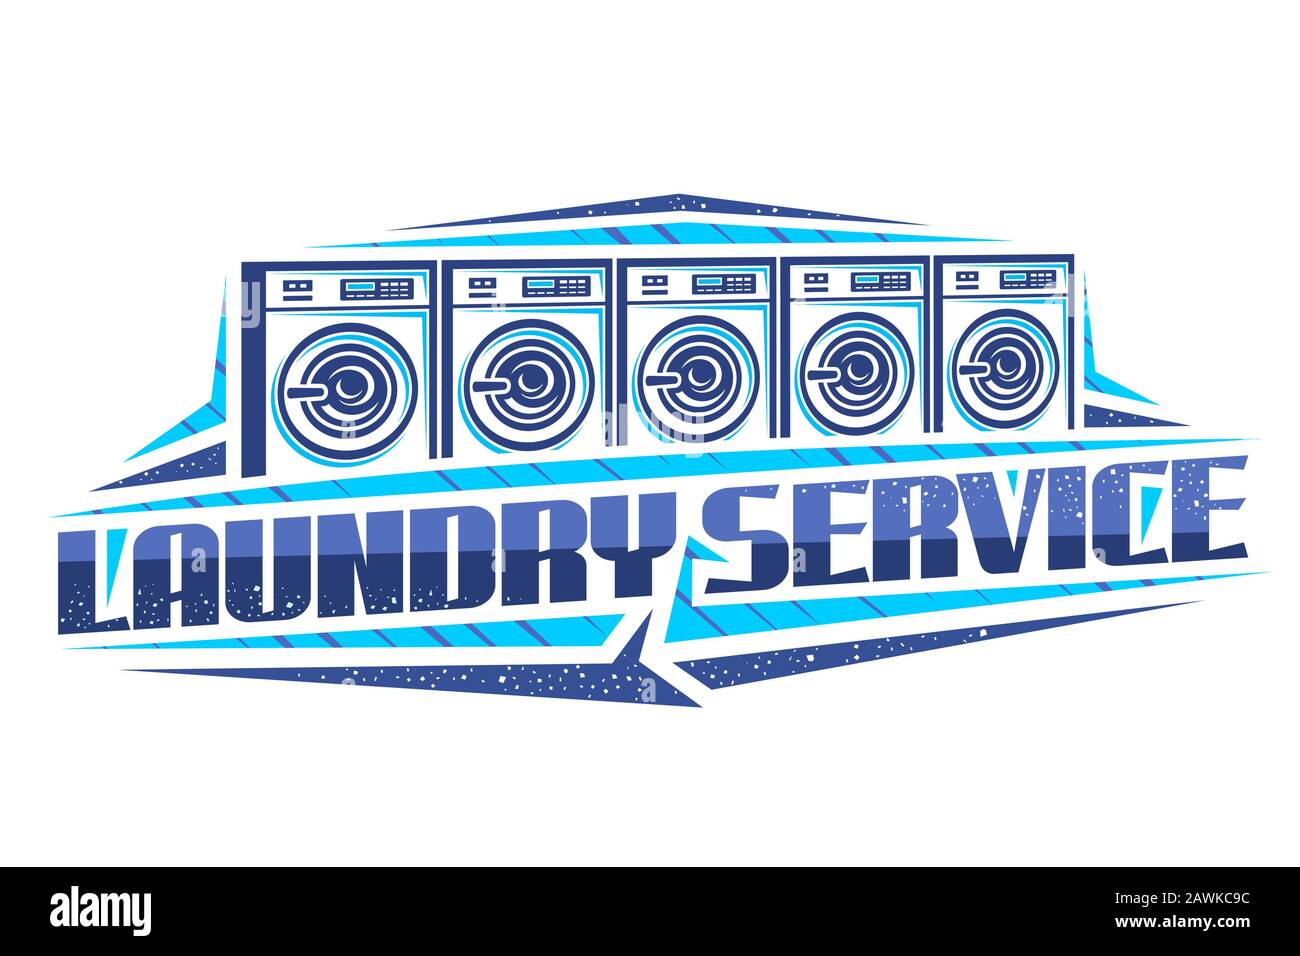 Vector logo for Laundry Service, decorative signboard with illustration of 5 automatic laundromats in a row, design concept with creative typeface for Stock Vector